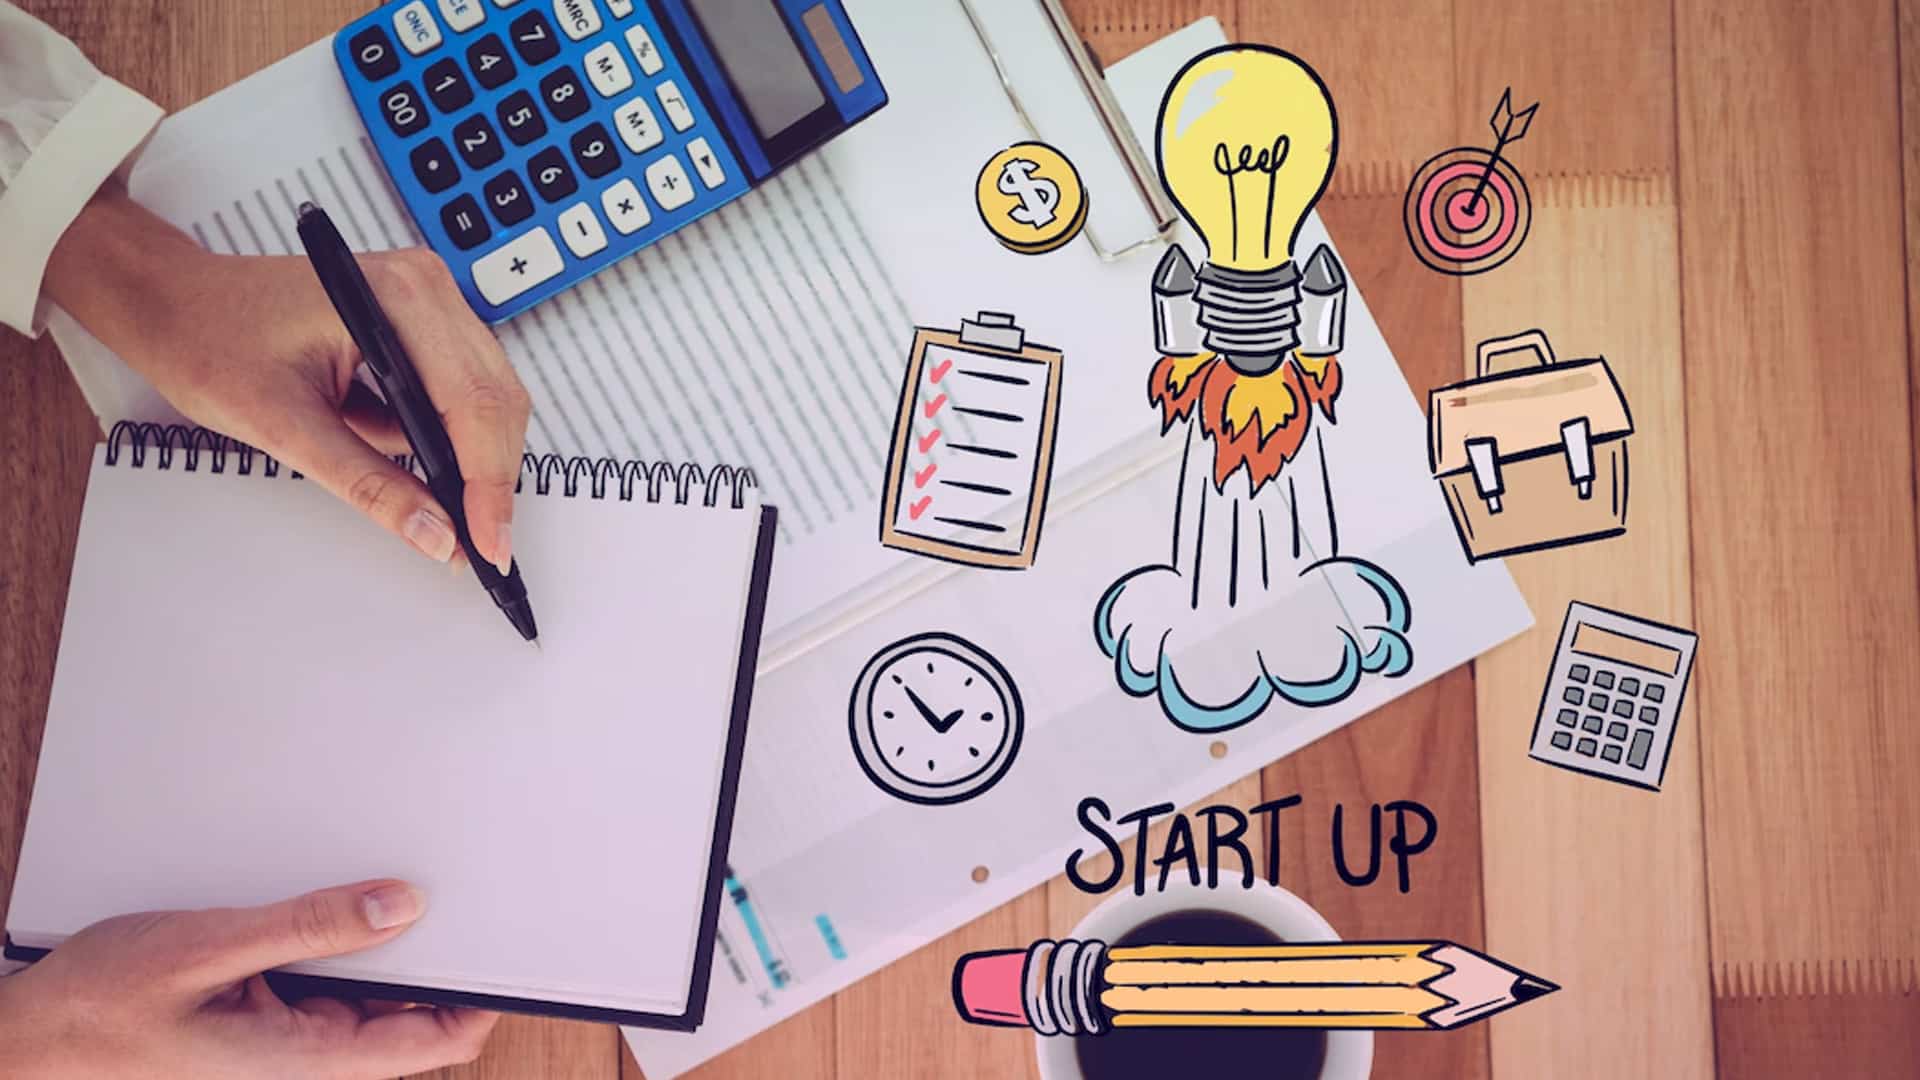 Only 11 pc tech investment in deep tech startups, need higher seed funding: NASSCOM president